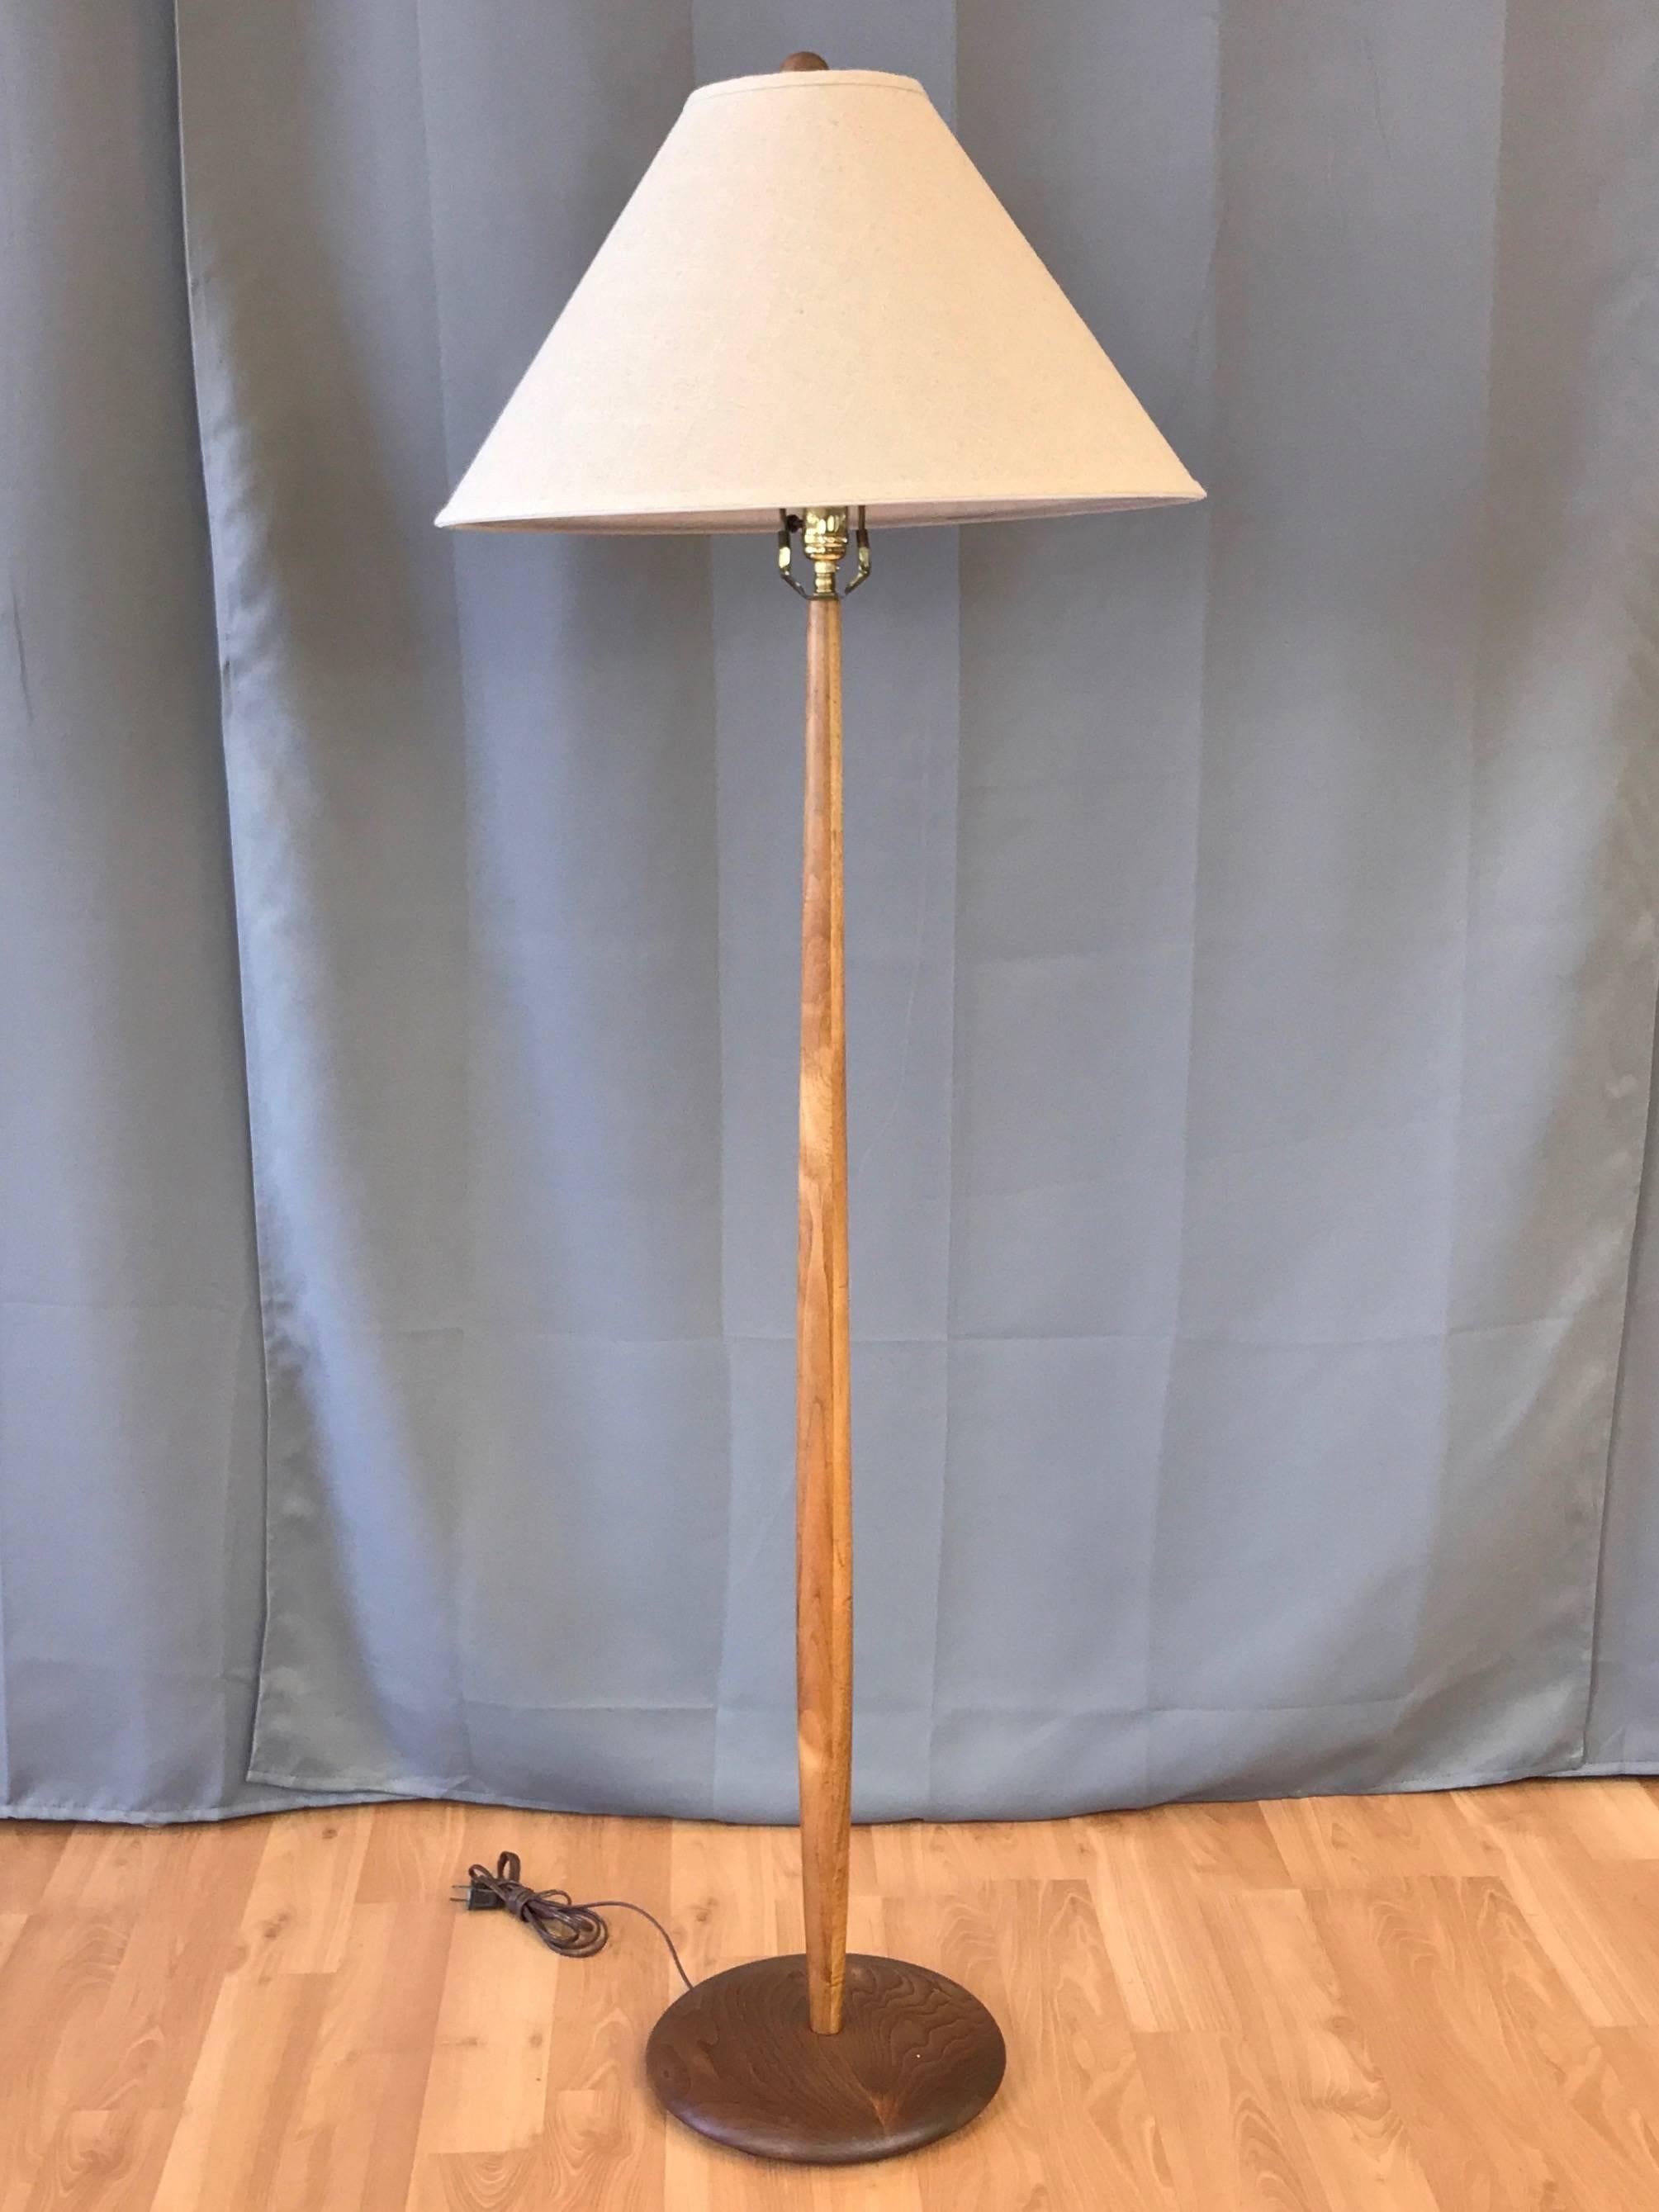 A 1960s rare and well crafted solid walnut floor lamp by Laurel Lamp Company.

Sleek stem gently tapers to a slender point at either end. Disc-shaped base is smoothly sculpted and displays dynamically figured grain. With original walnut ball